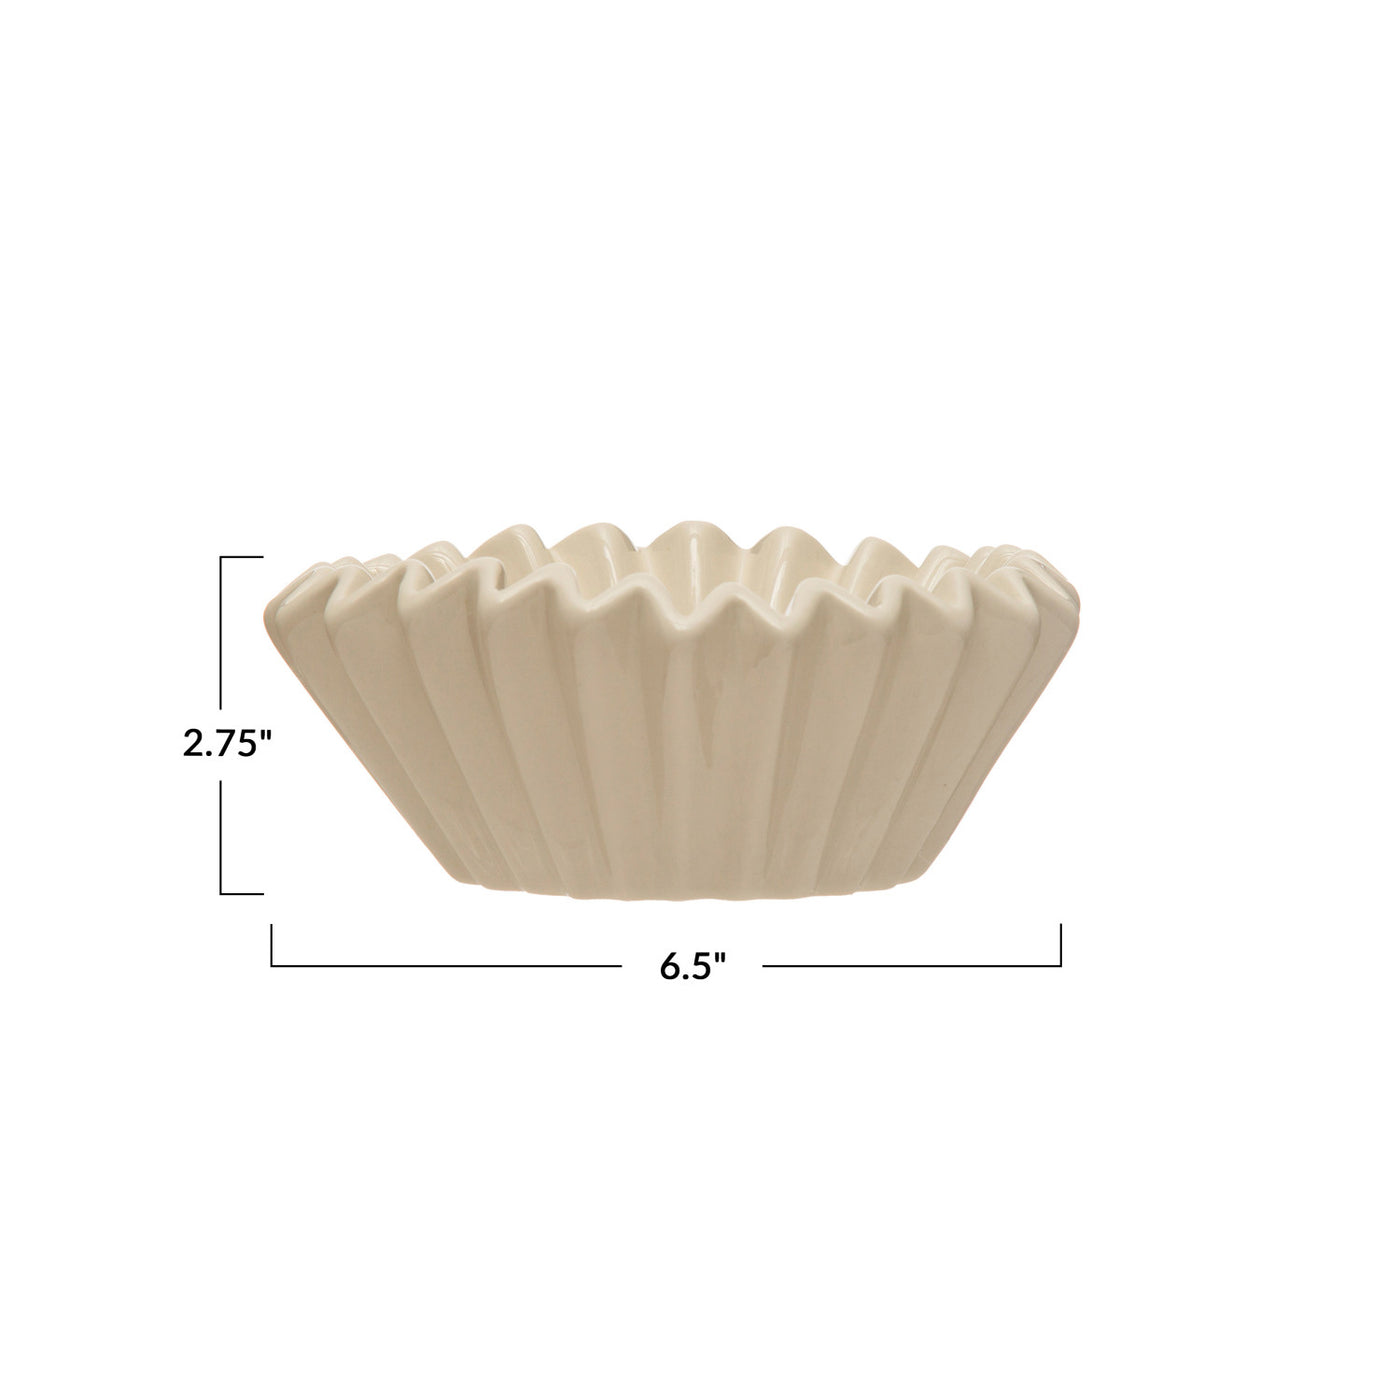 Stoneware Fluted Bowl in White, 6.5"